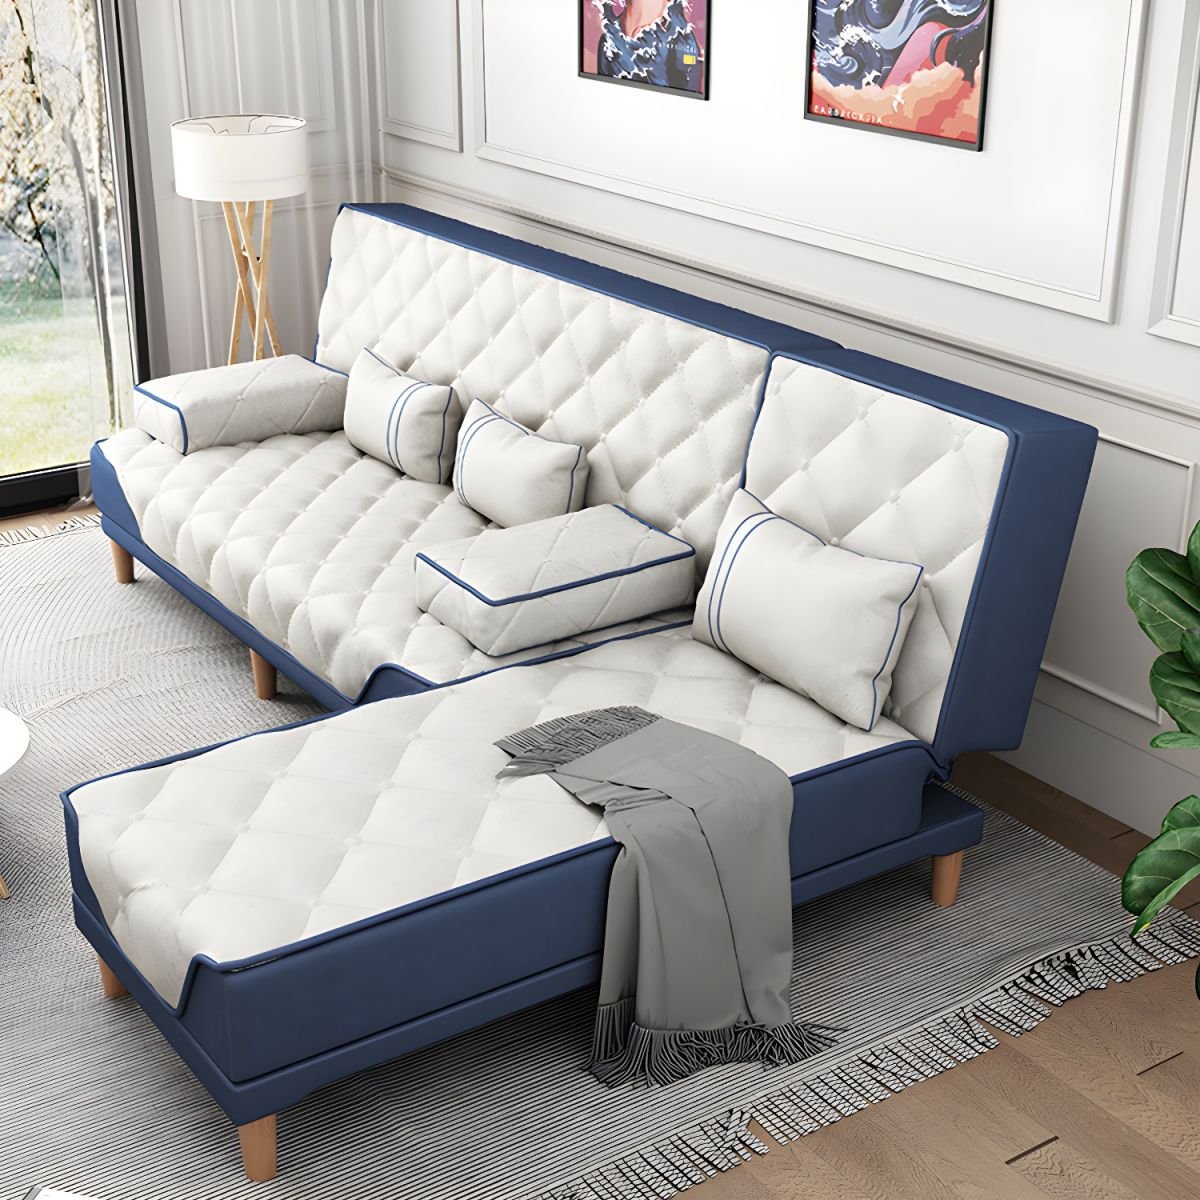 Contemporary Tight Back Convertible Sofa and Chaise with Pillow Top Arm - 73"L x 57"W x 34"H Dark Blue/ White Tech Cloth